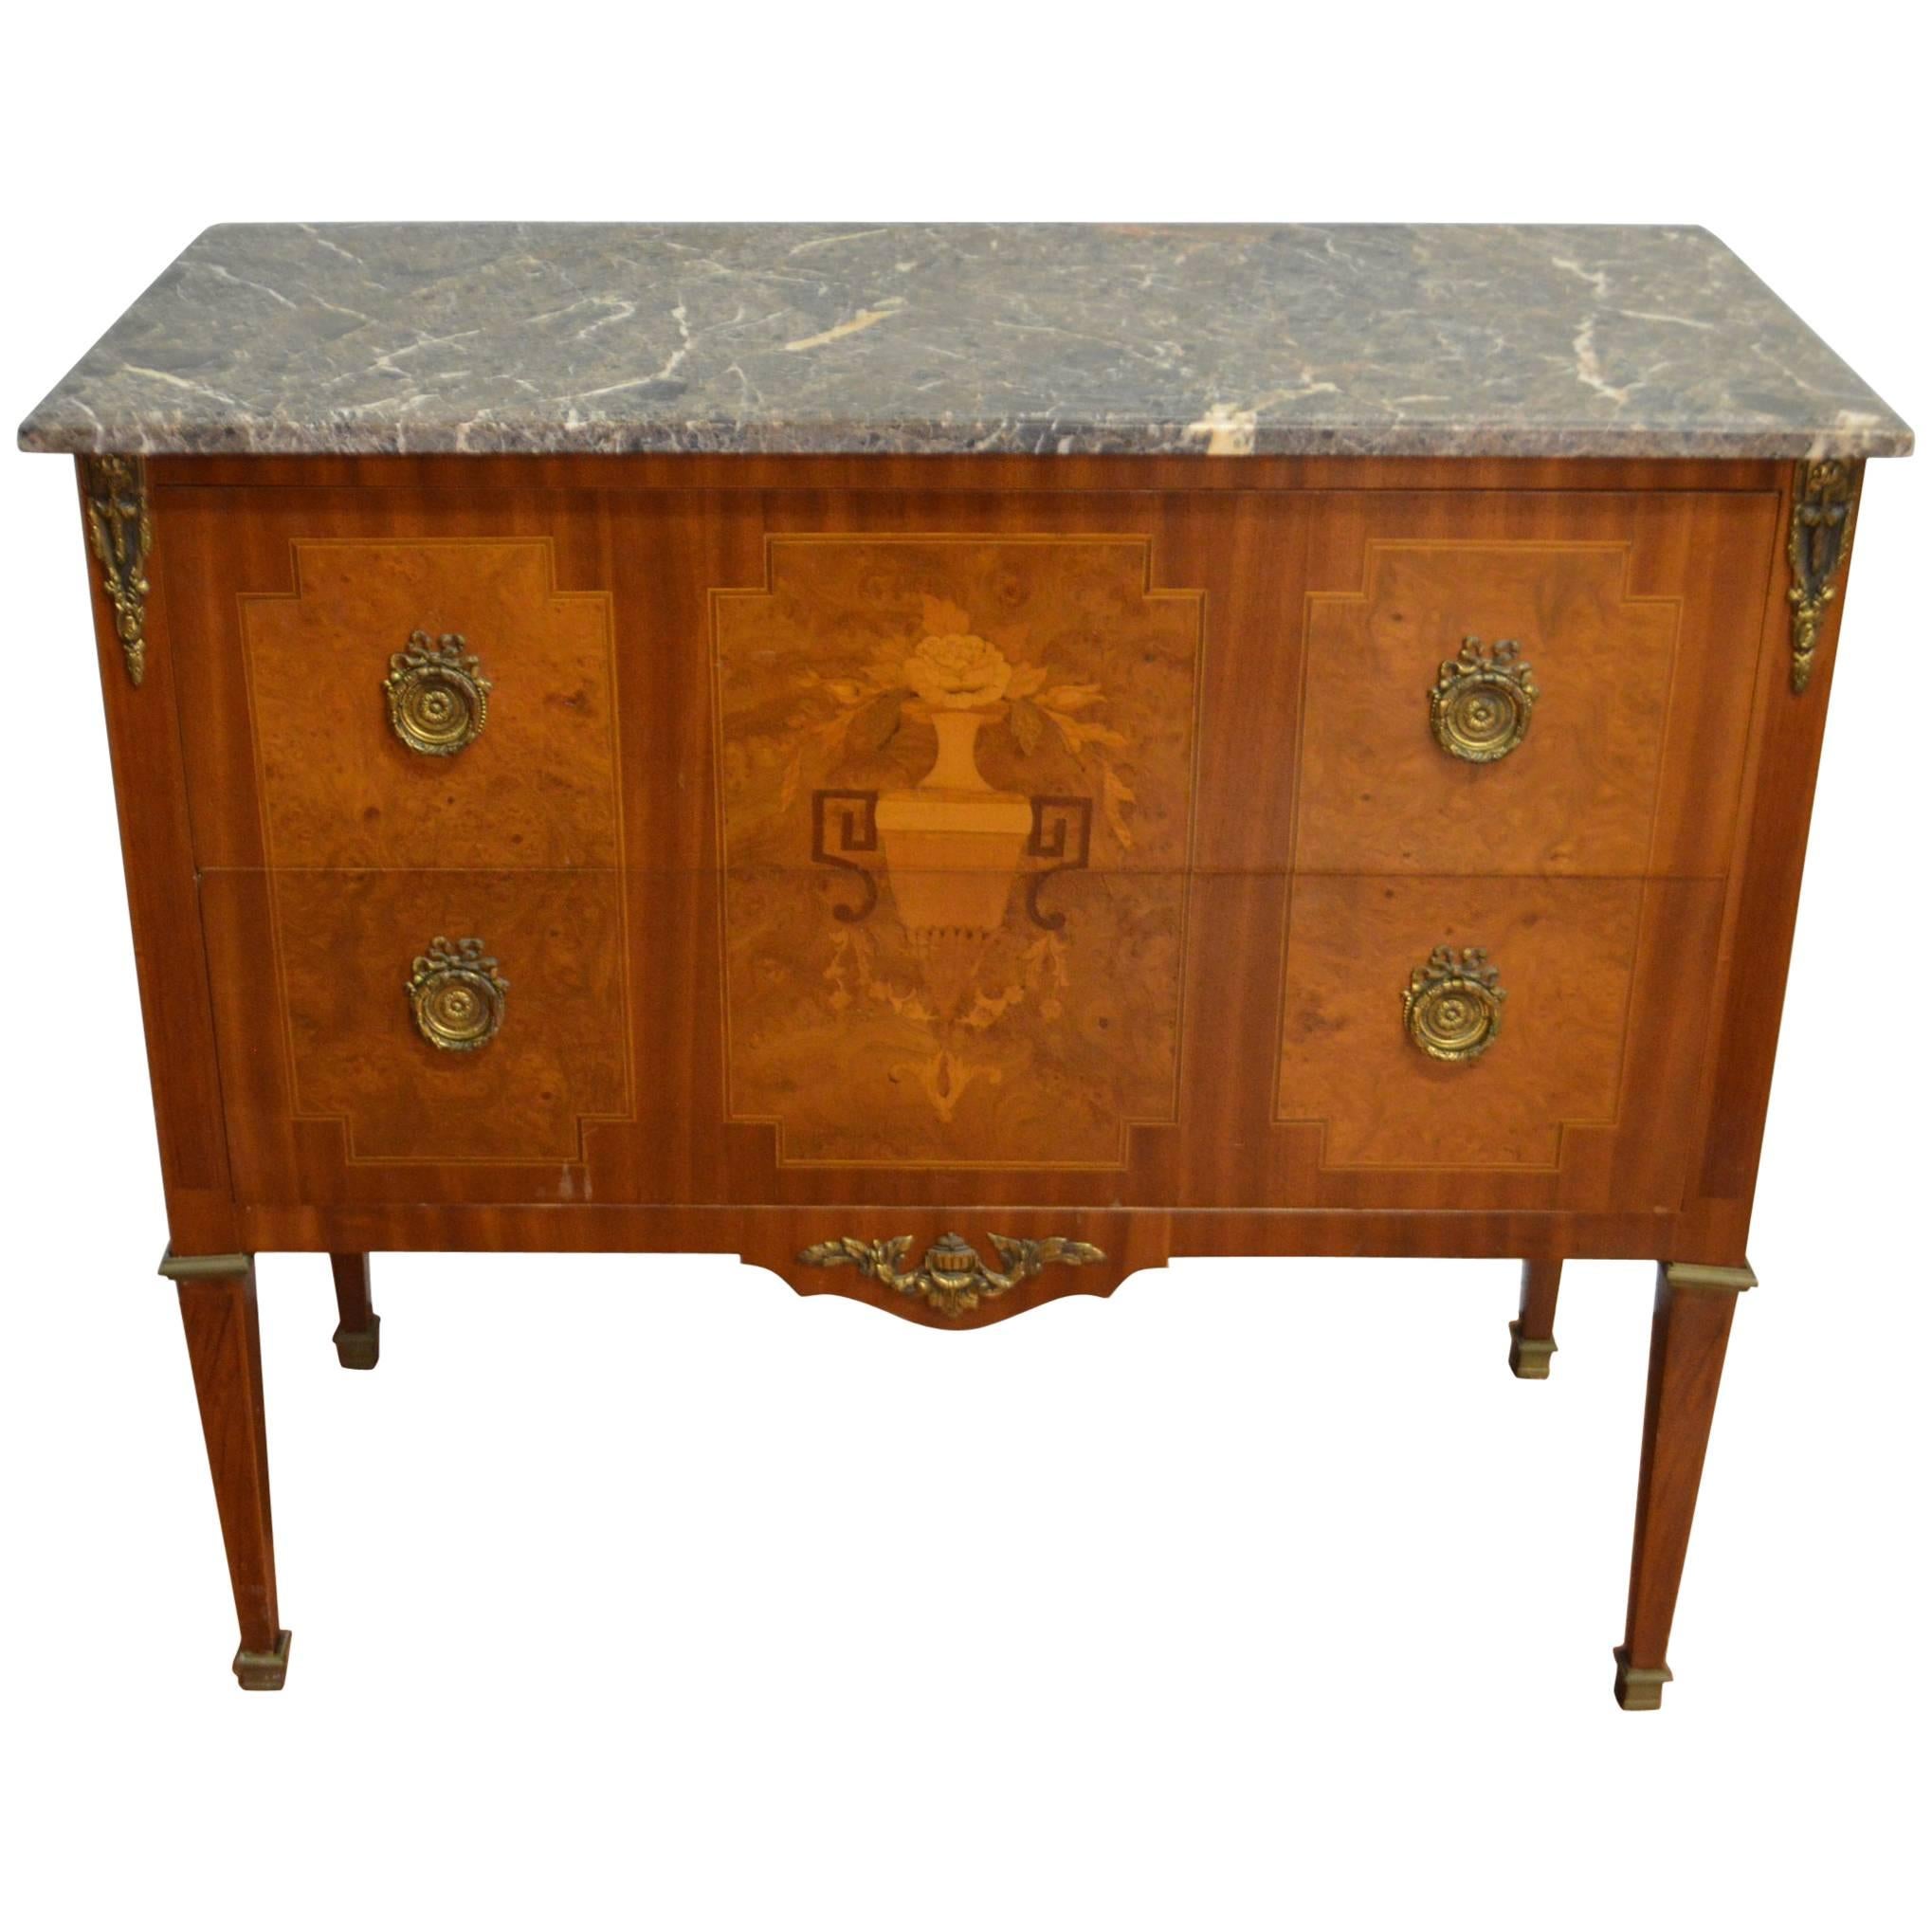 Louis XVI Style Commode with Fine Marquetry In-Lay, Two Drawers, Marble-Top